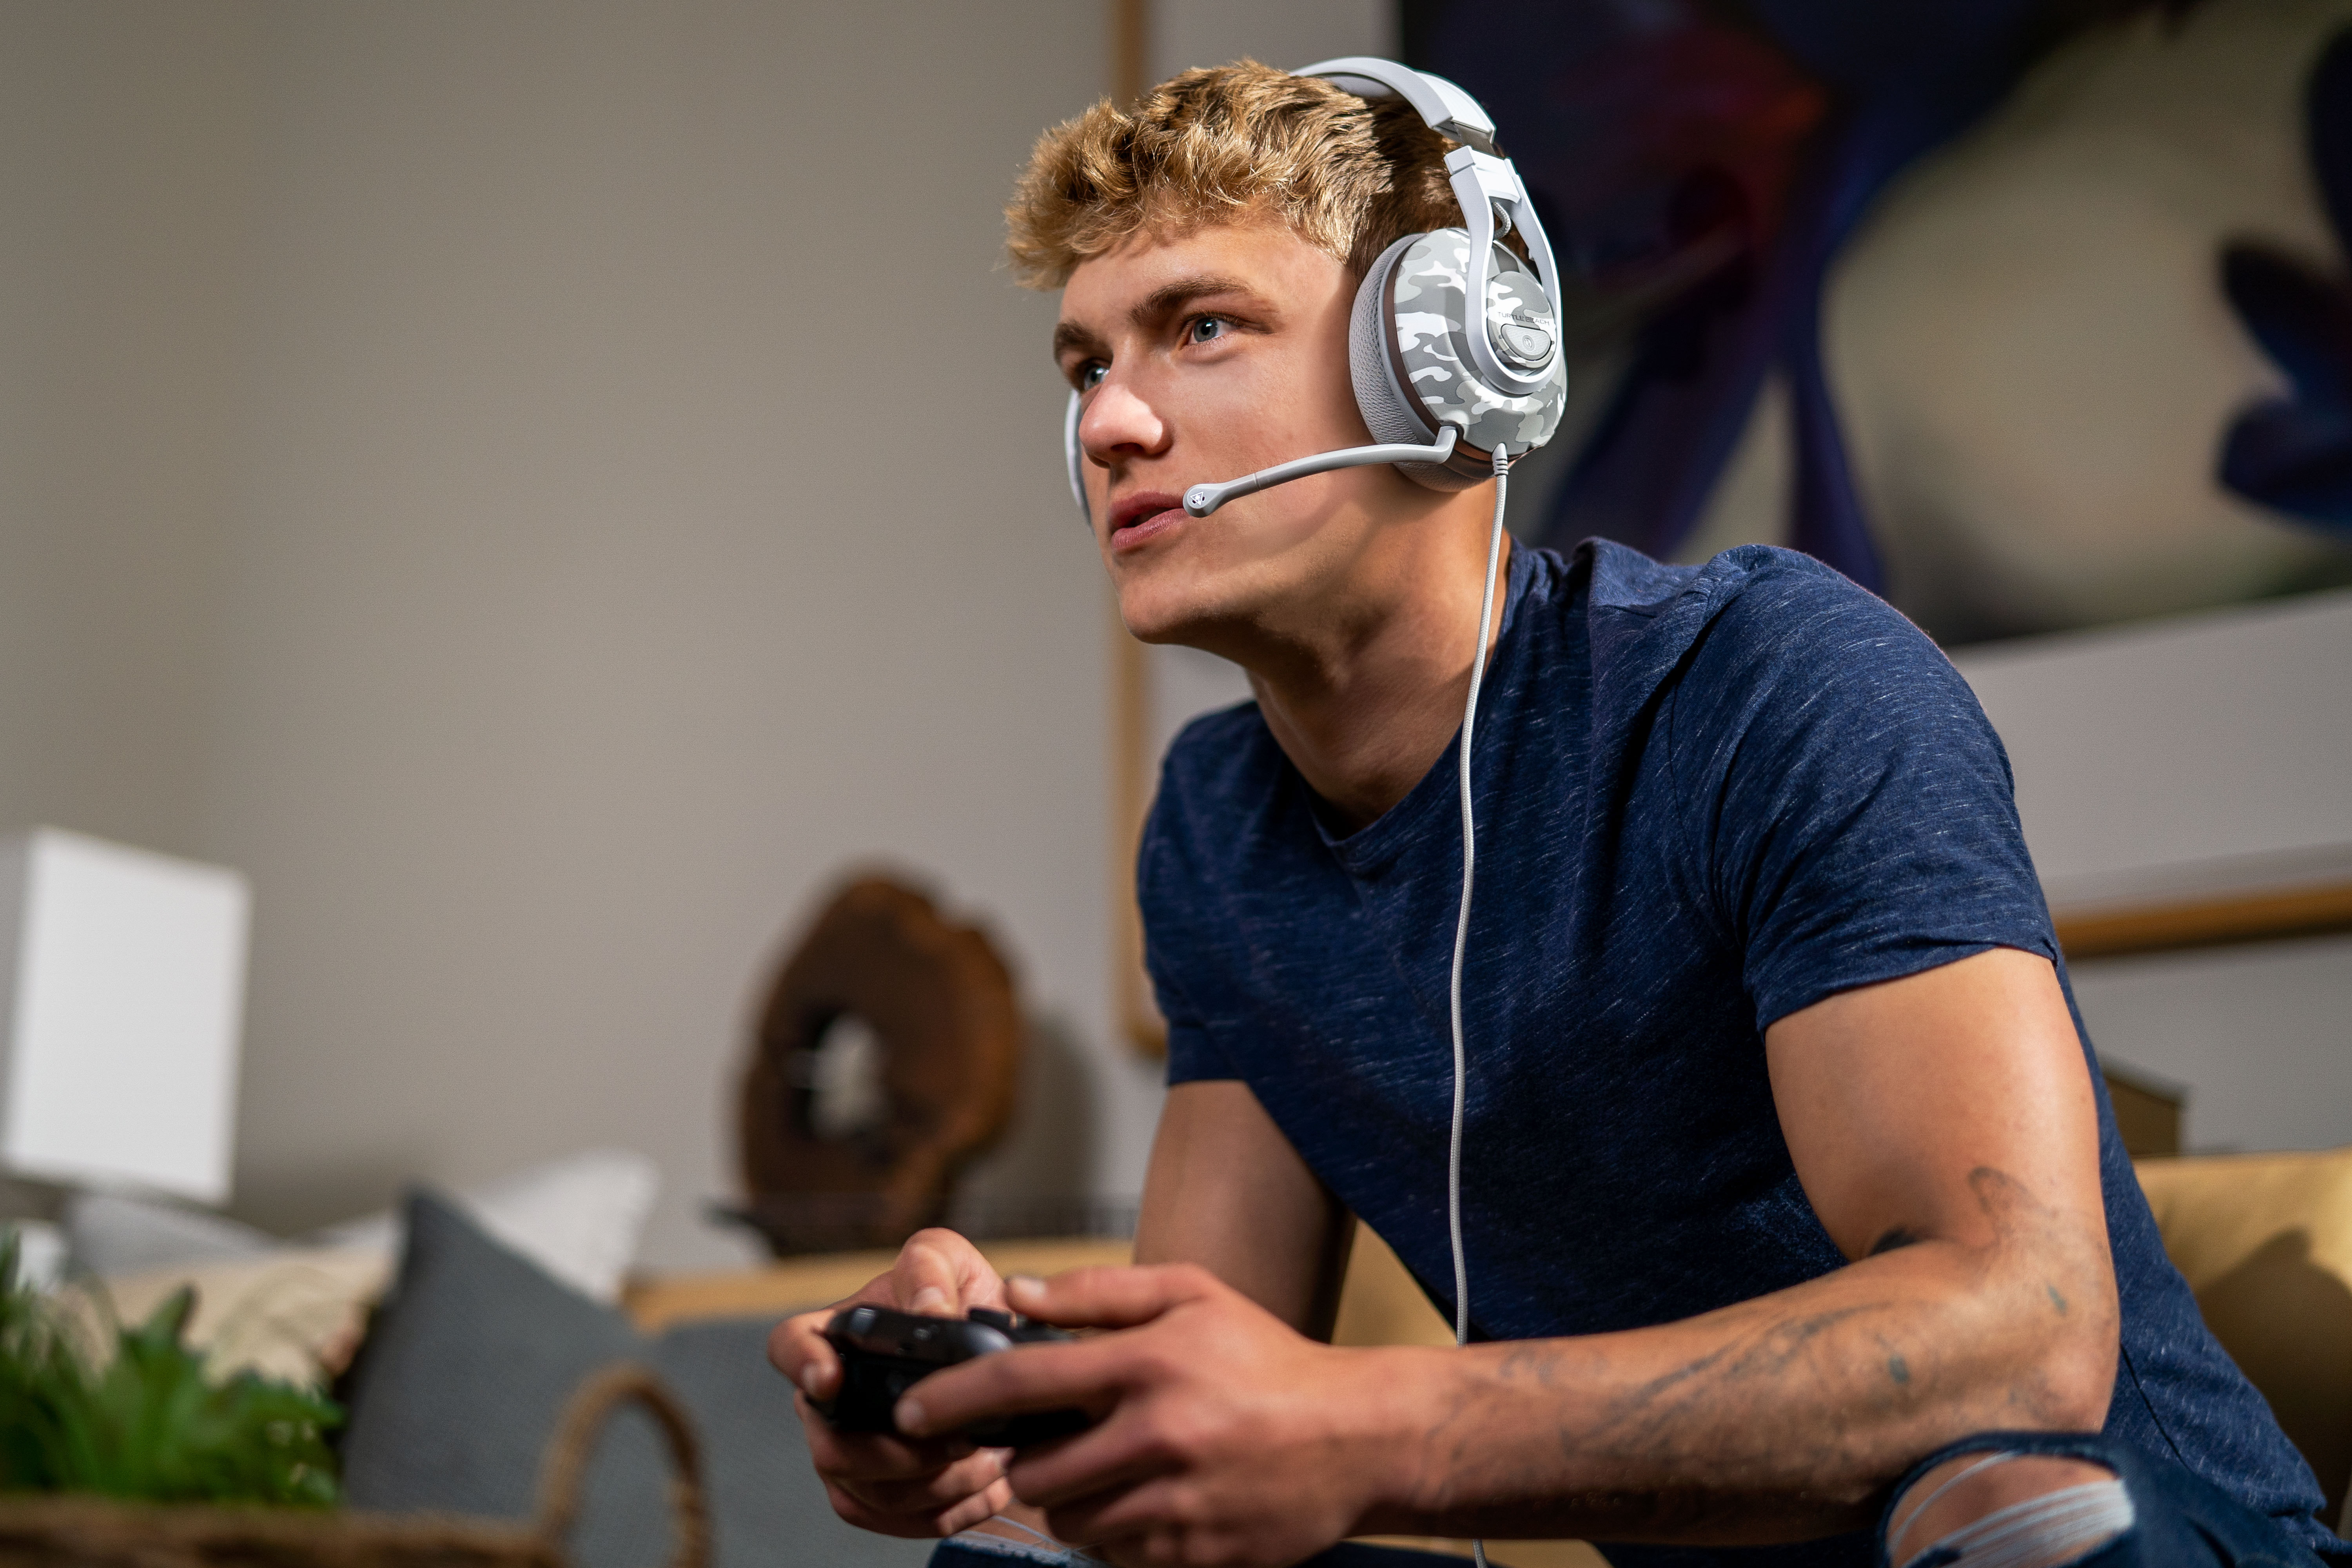 Turtle Beach Expands Its Mobile Gaming Accessories Line With the